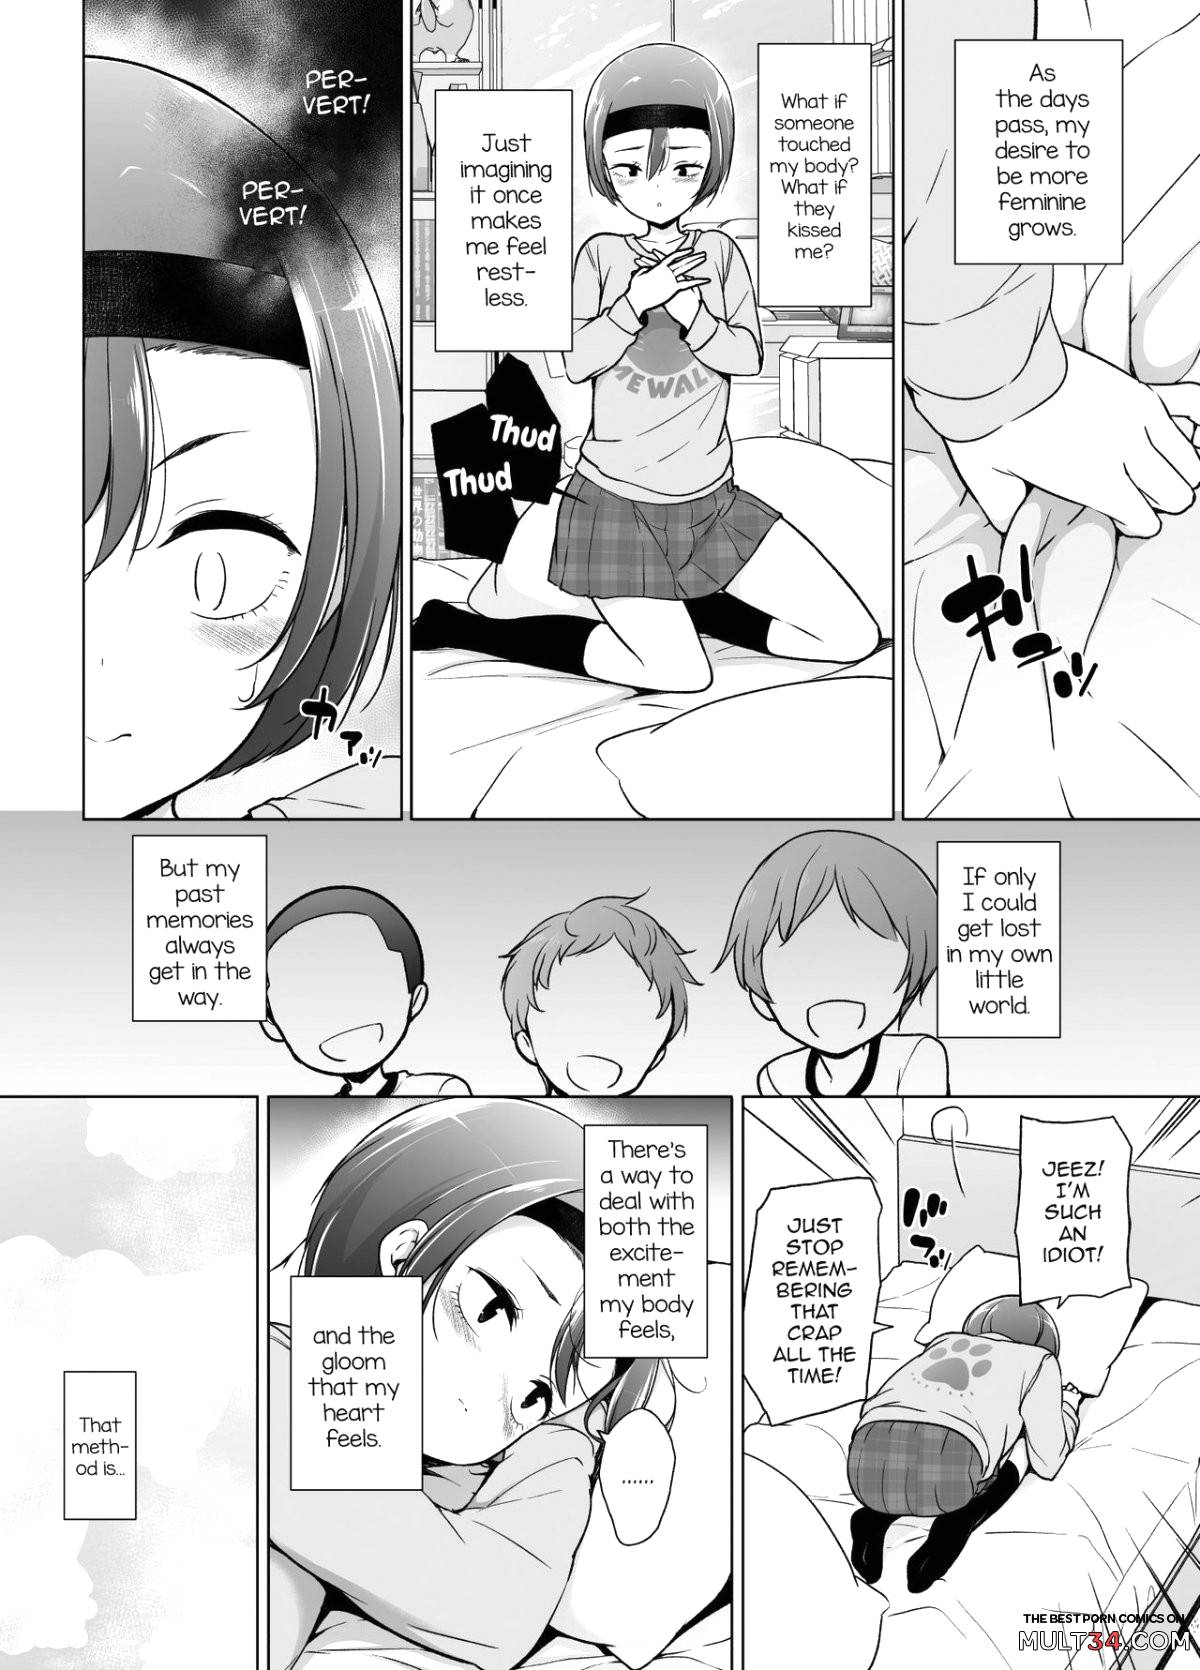 The Pervert page 8